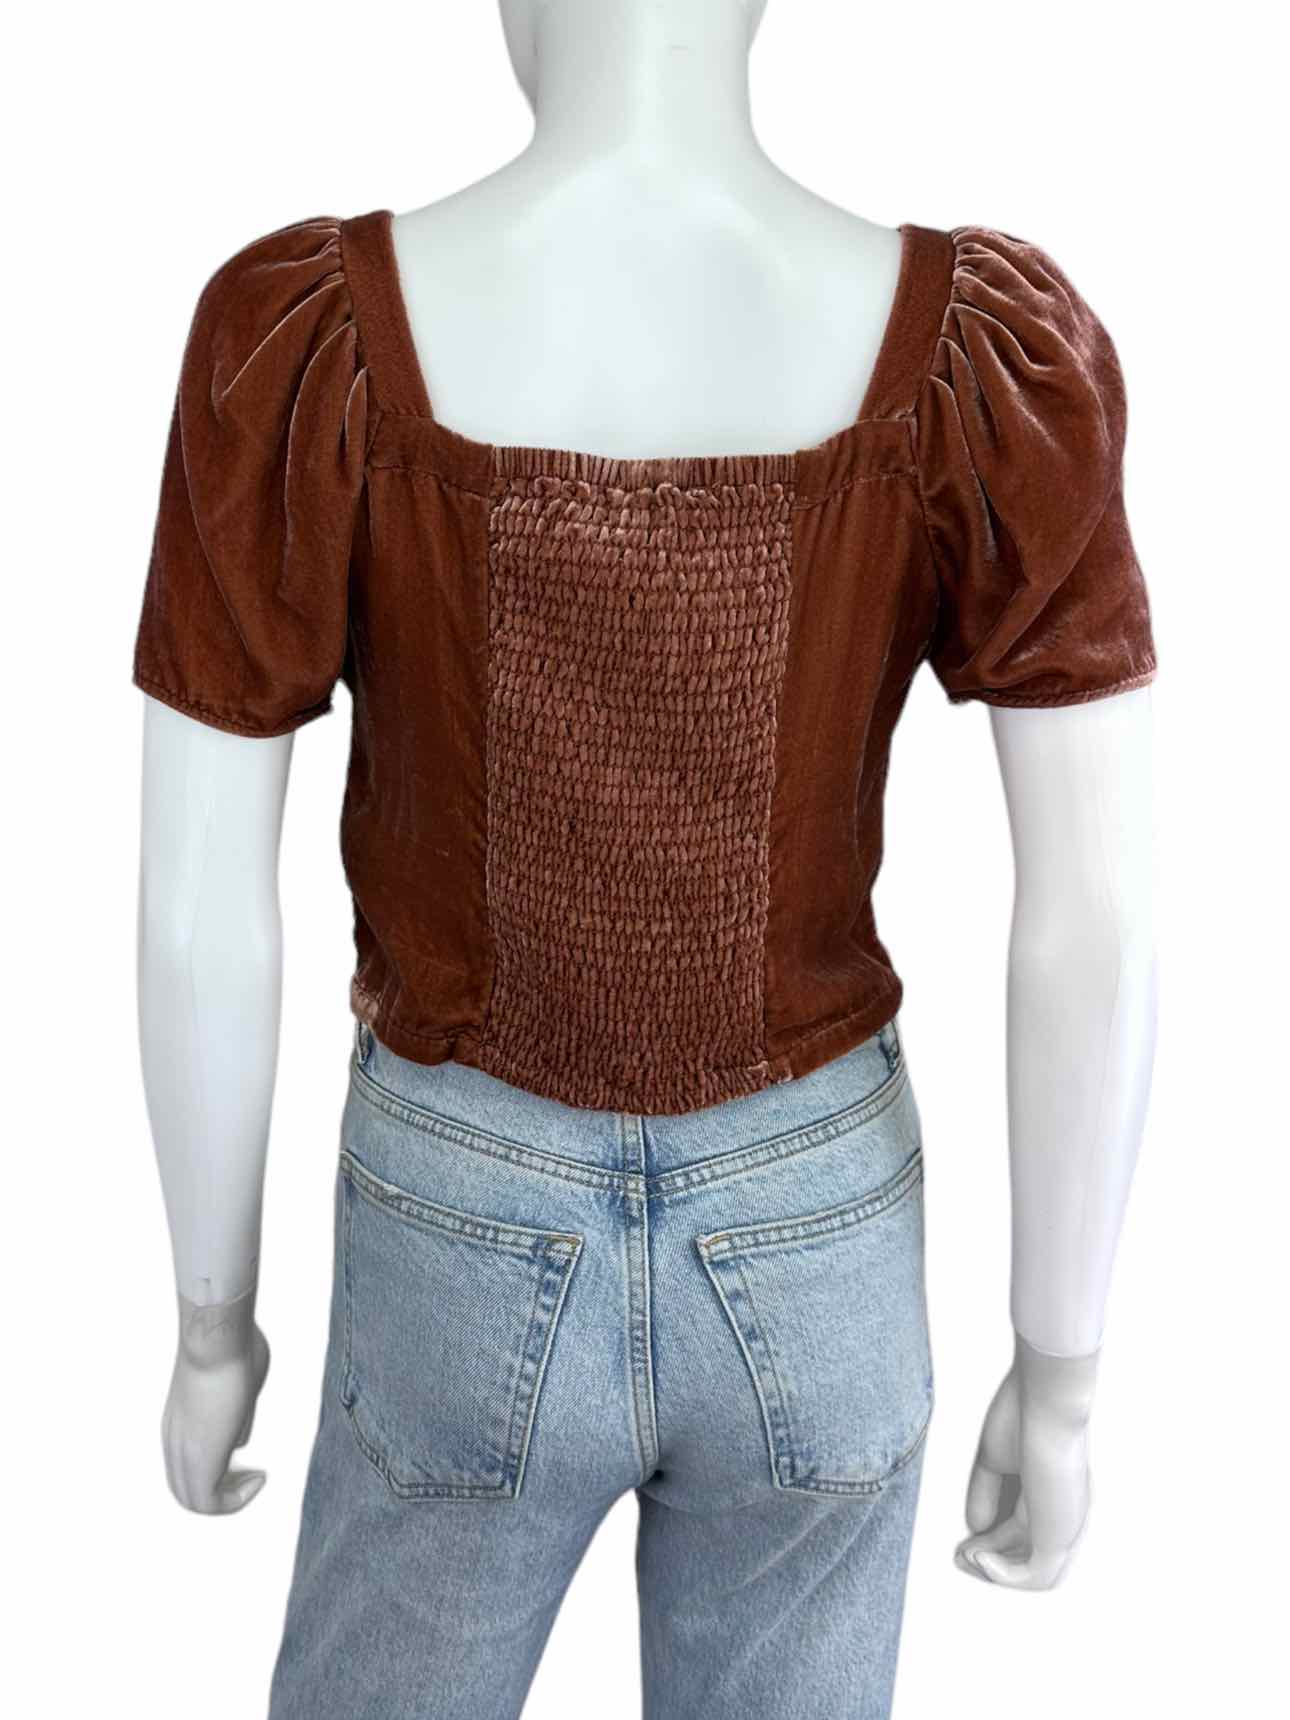 Madewell Brown Cropped Velvet Top Size XS